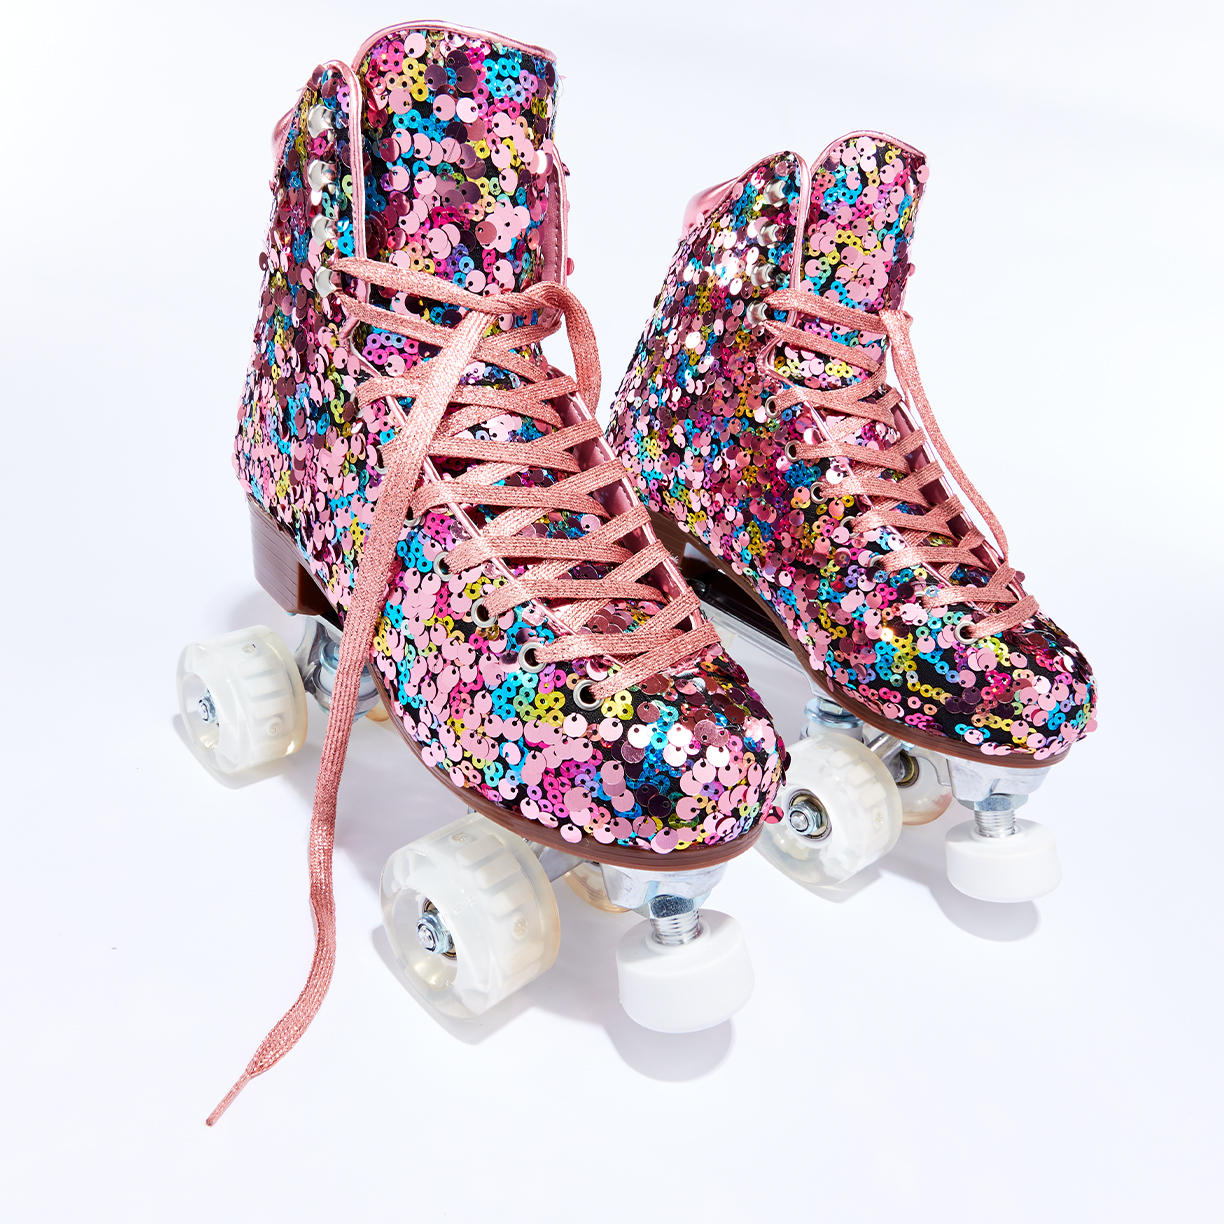 Quirky Spring Kicks Feat. Jessica Simpson Roller Skates